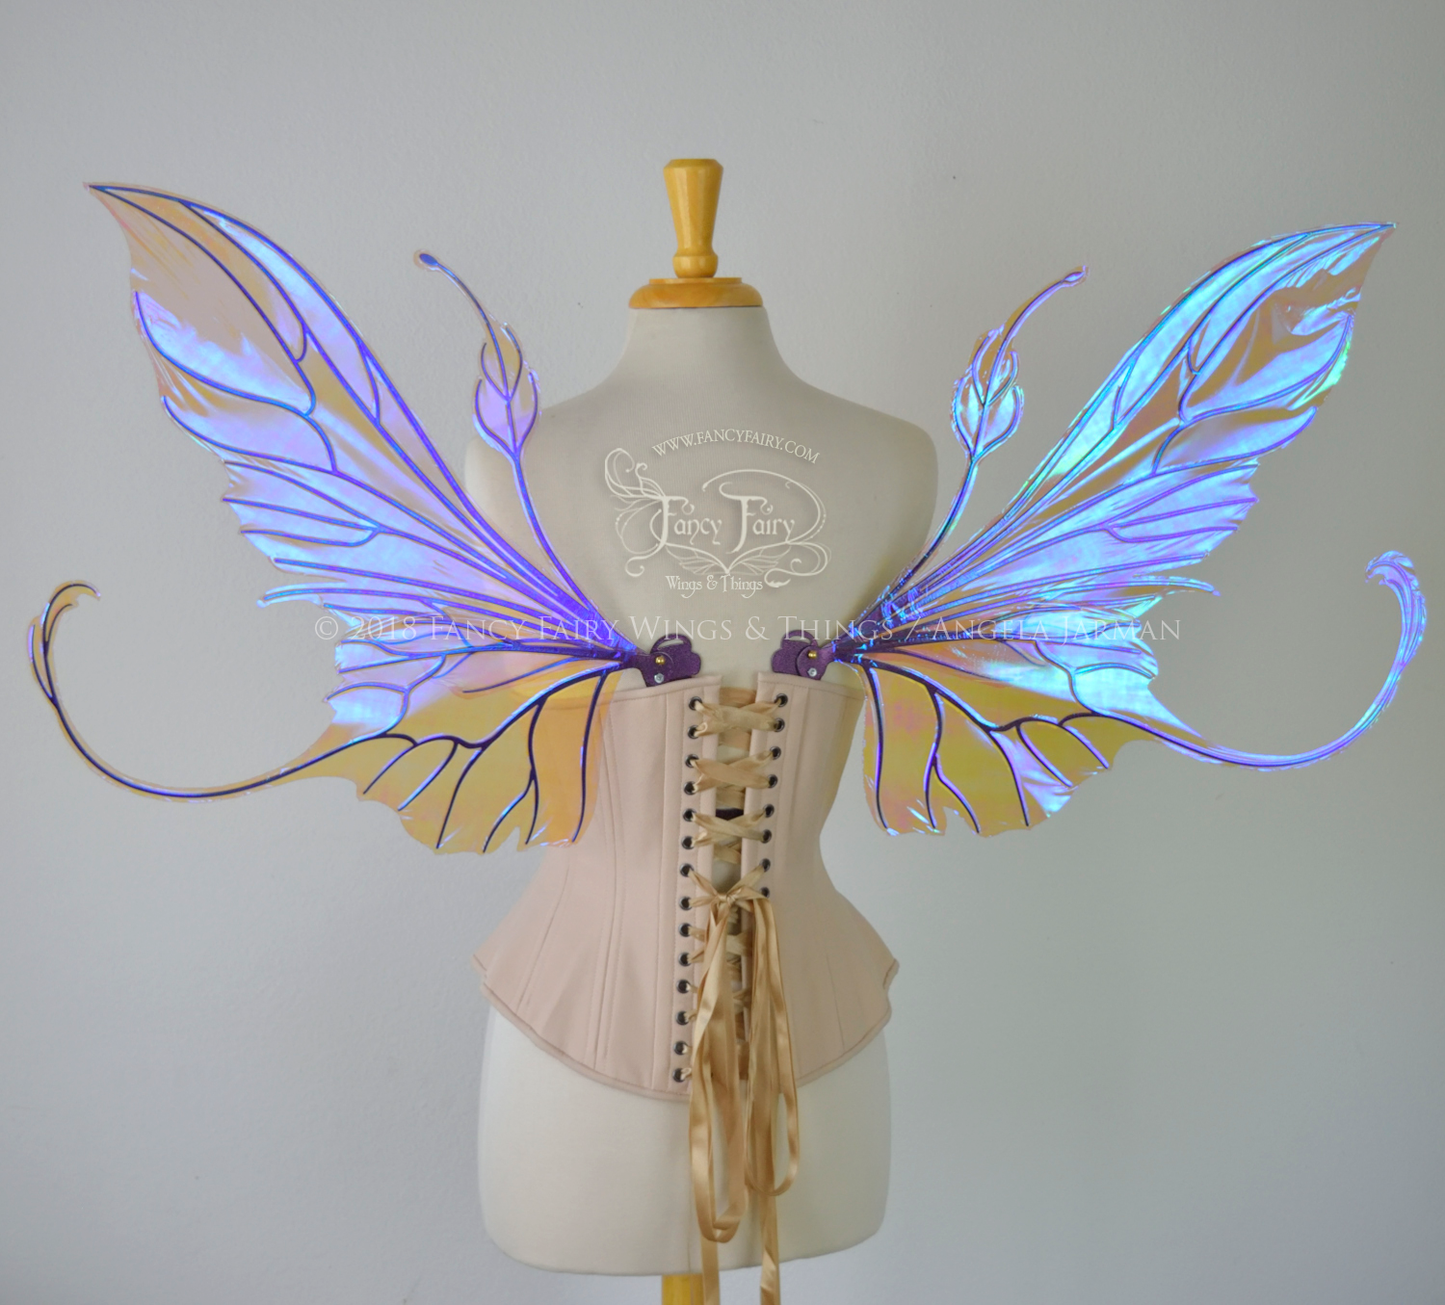 Elvina Iridescent Convertible Fairy Wings in Lilac with Chameleon Cherry Violet Glitter veins